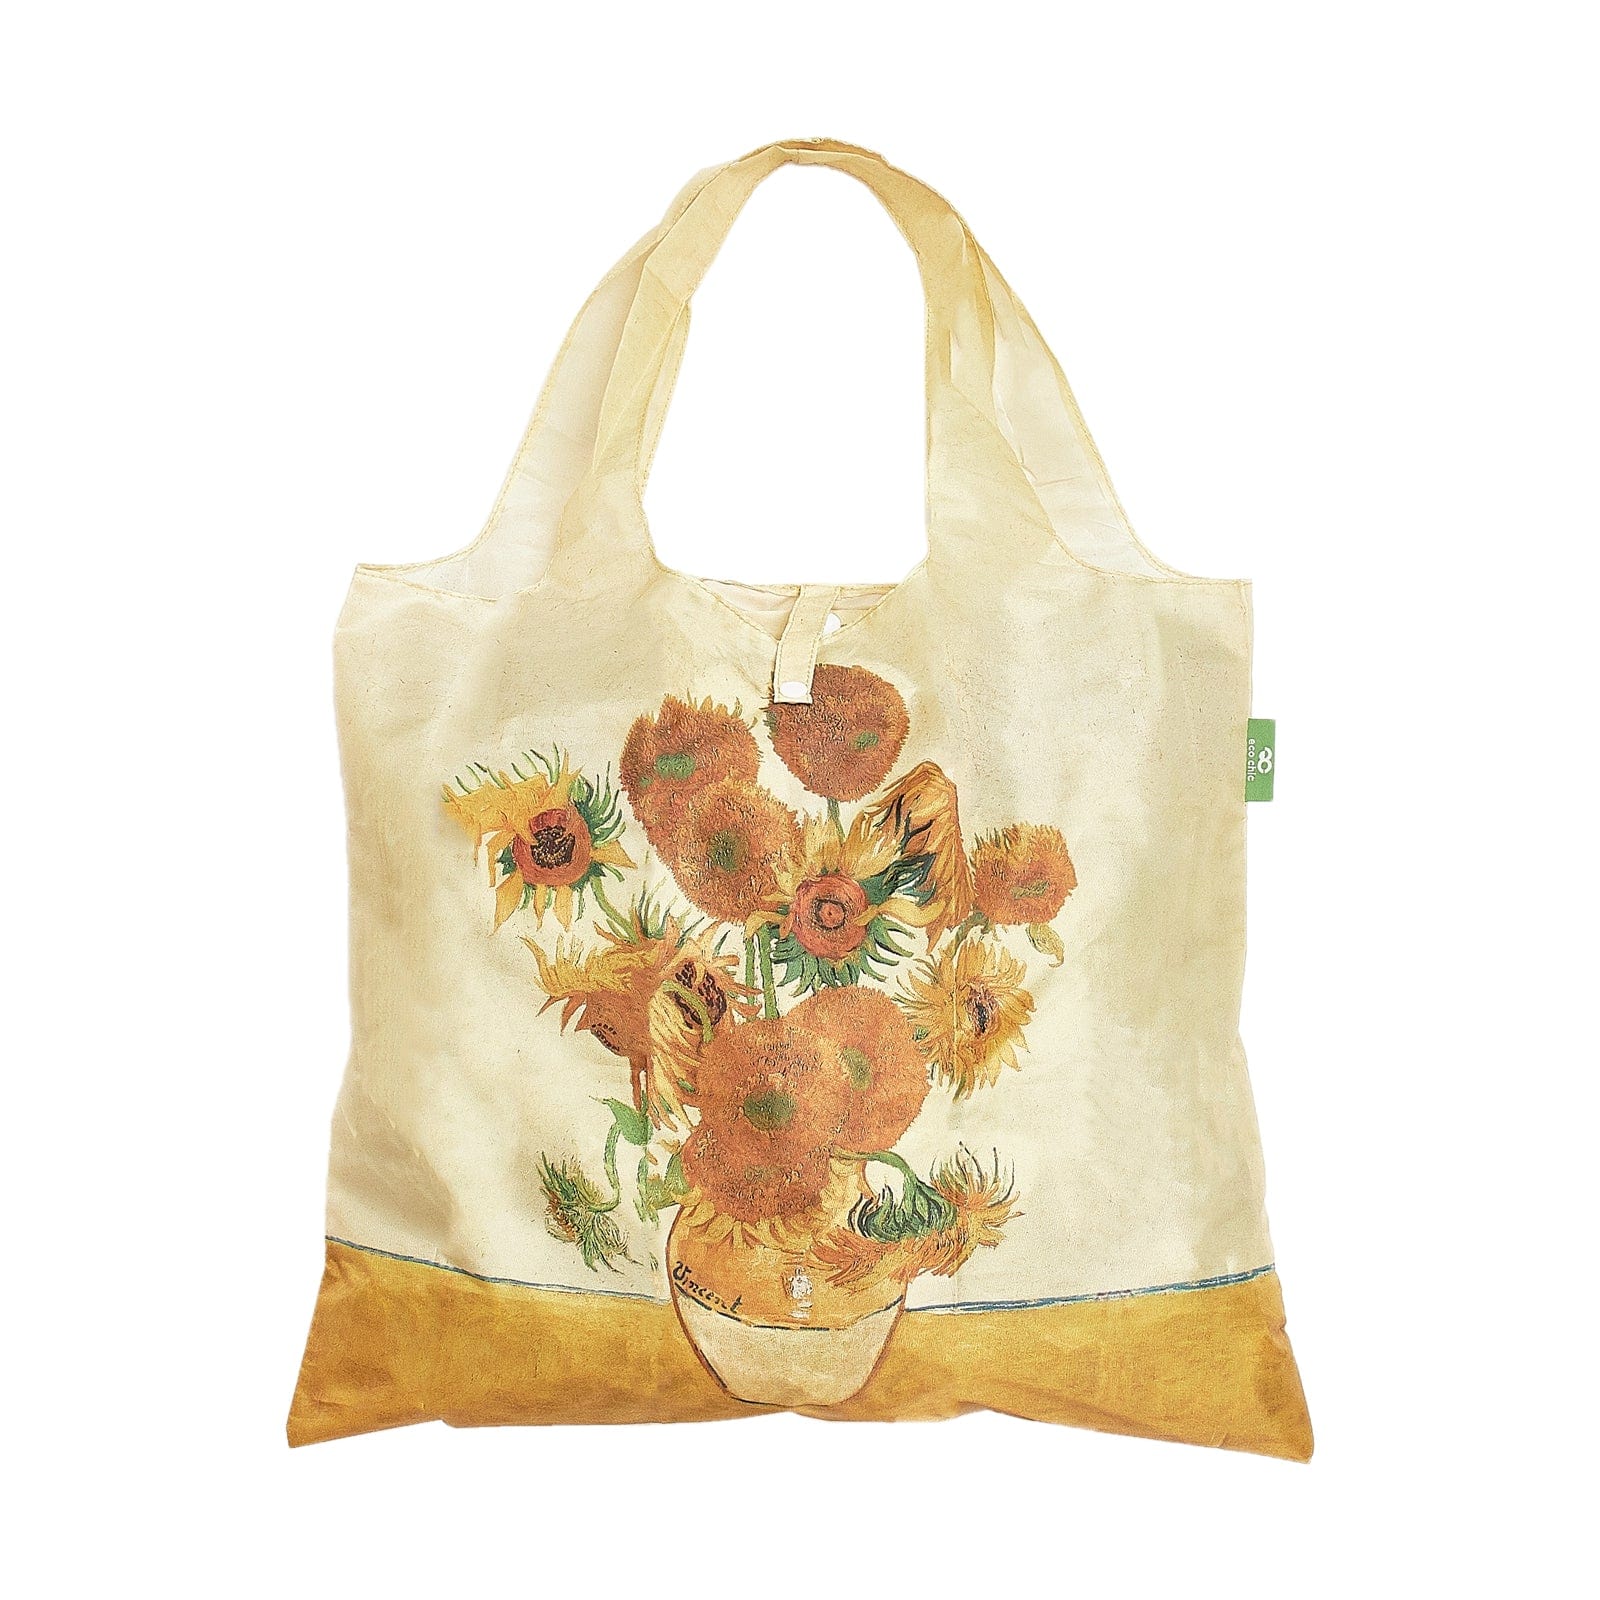 Eco Chic Blue Eco Chic Lightweight Foldable Reusable Shopping Bag National Gallery Sunflowers